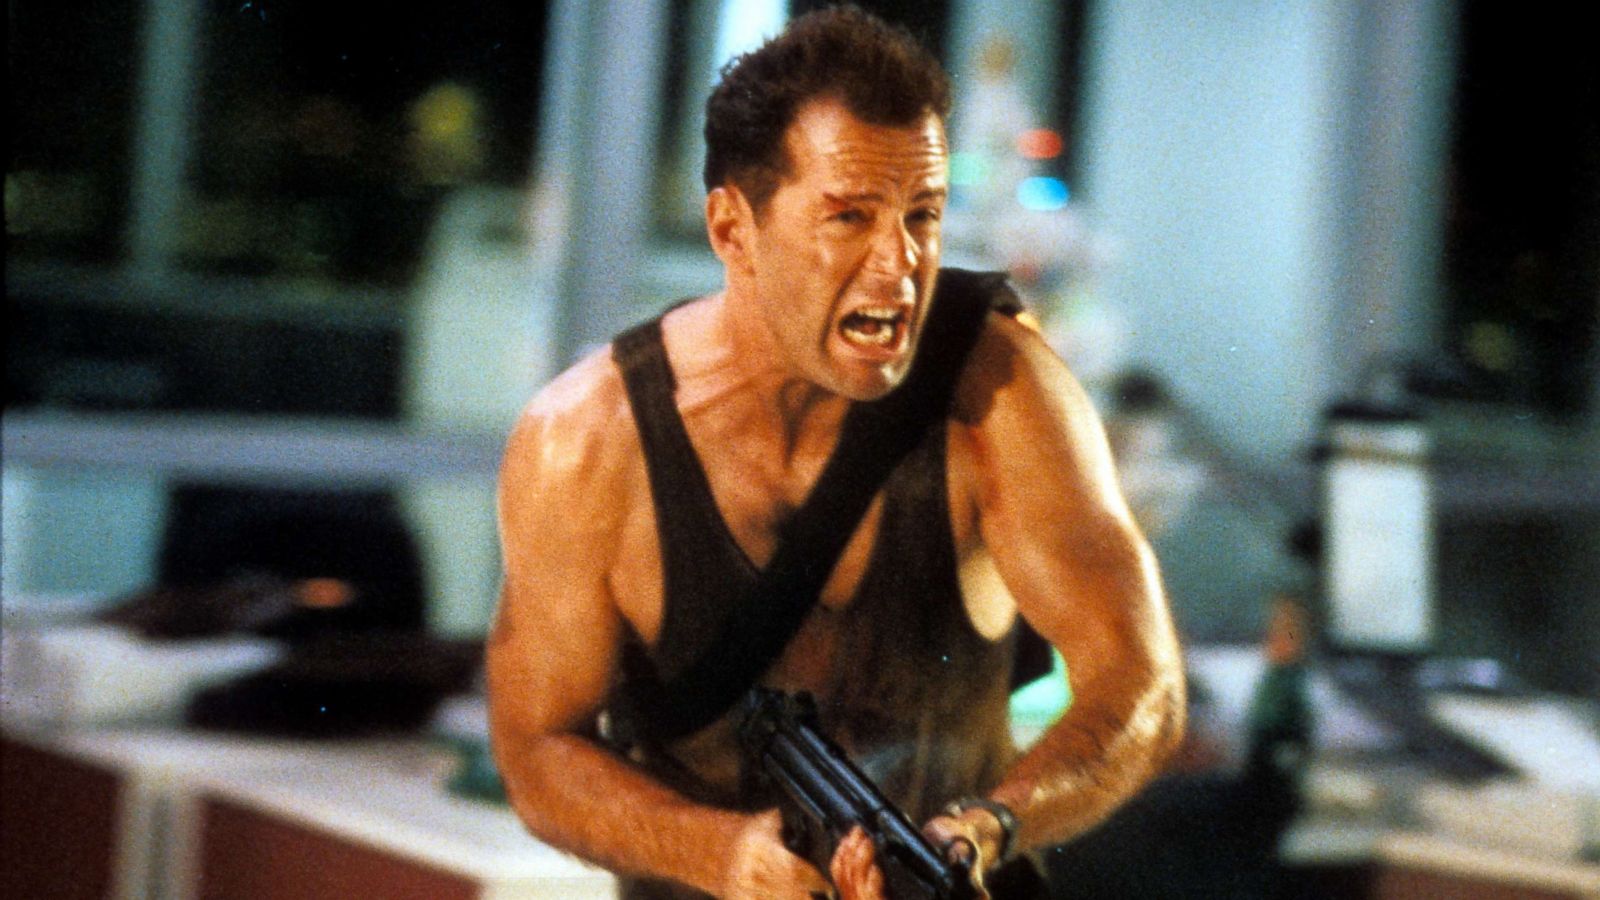 From Die Hard to Versatile Roles